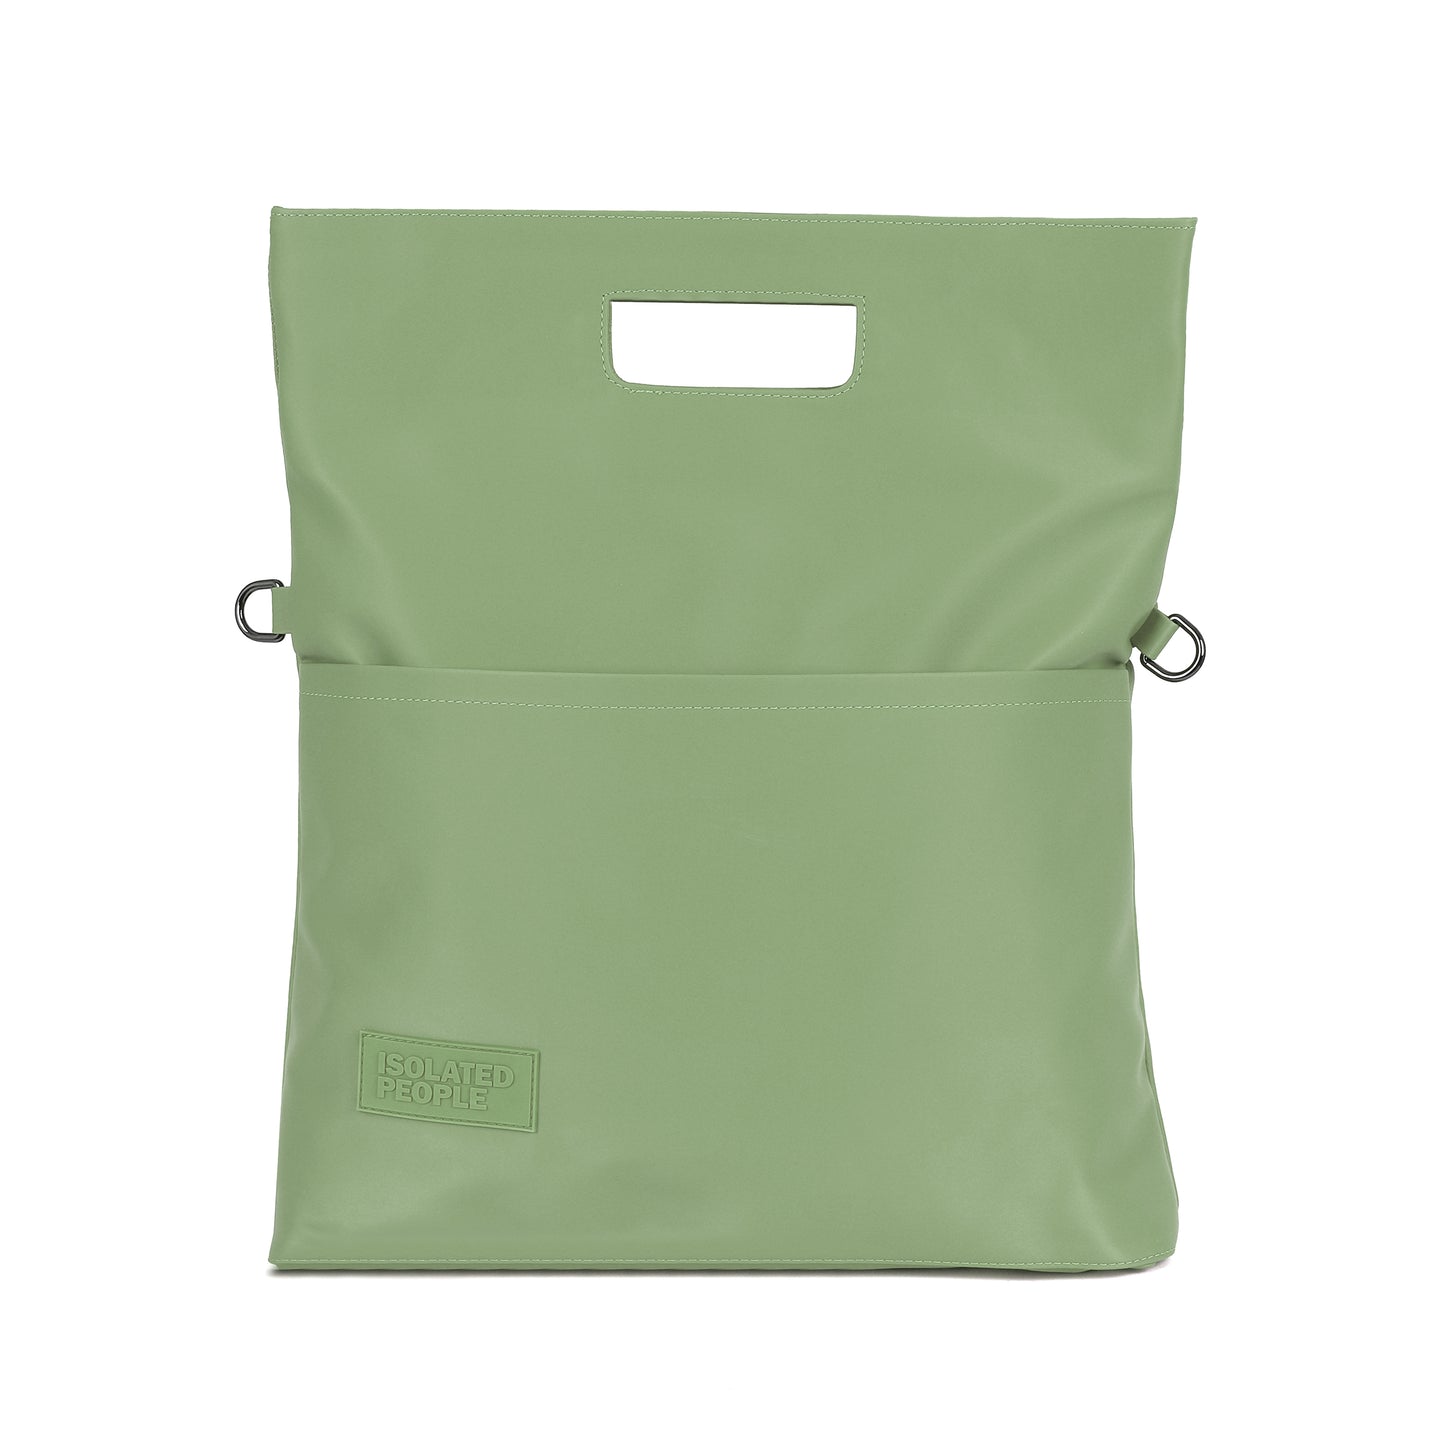 Isolated People Mint Green Companion City Bag